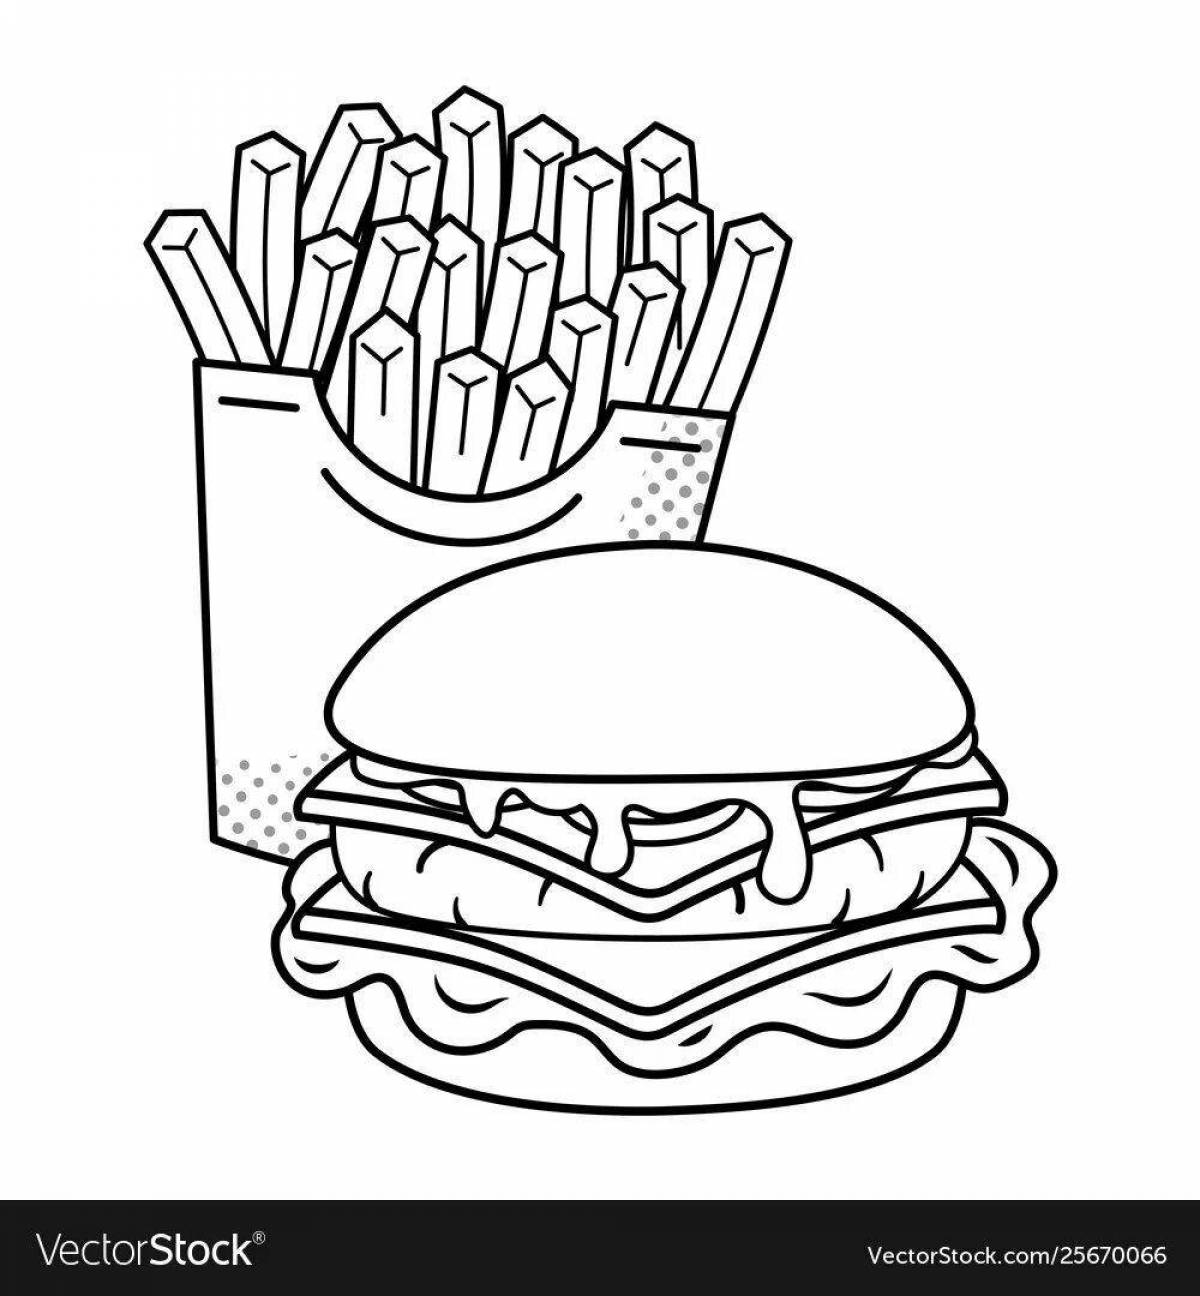 French fries coloring page